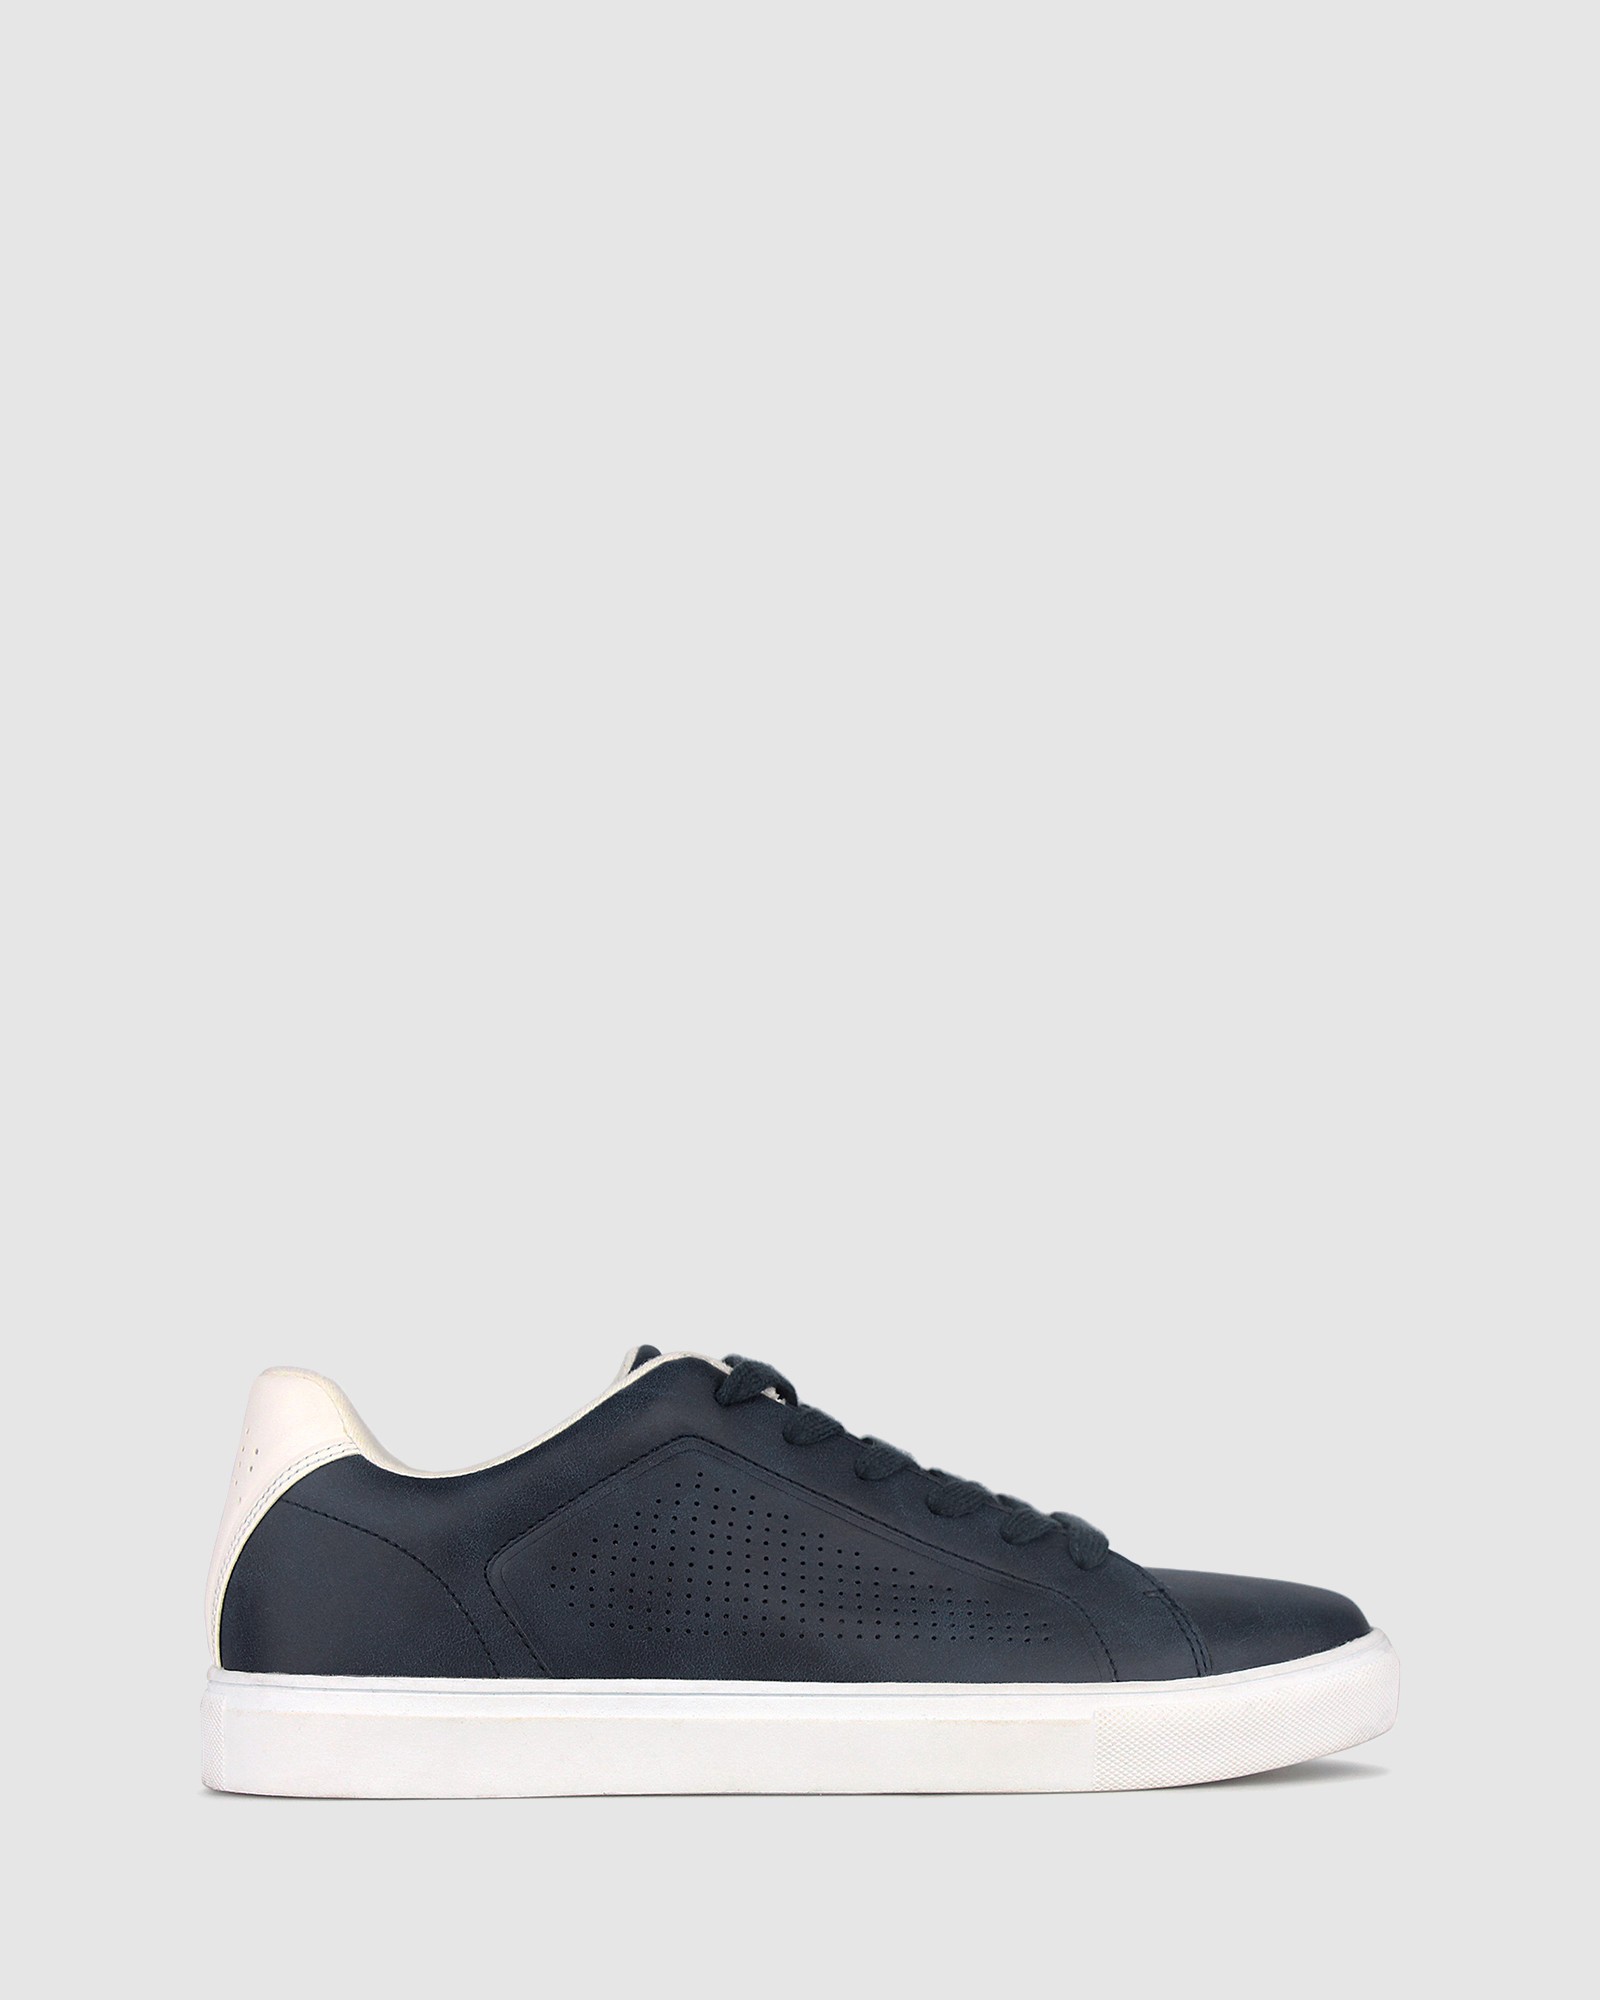 Charlie Lifestyle Sneakers Navy by Betts | ShoeSales